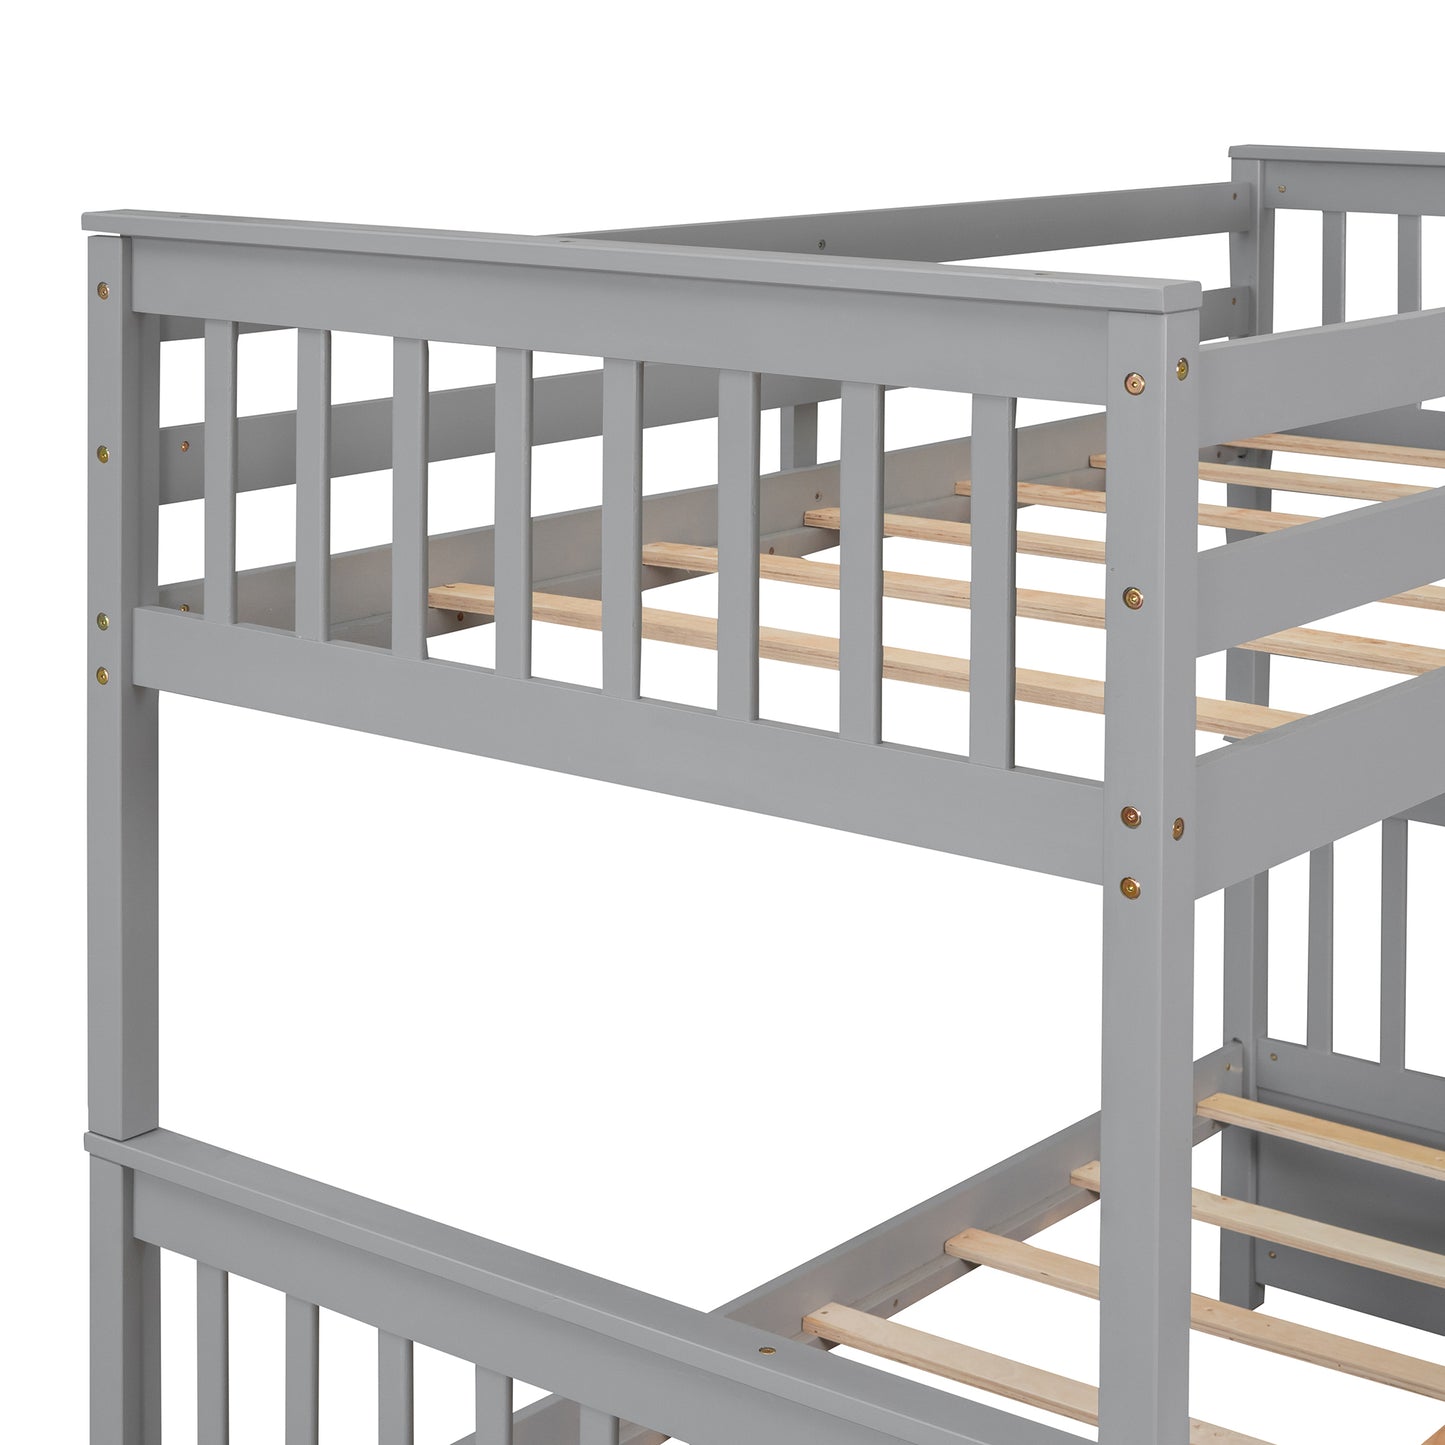 Twin-Over-Full Bunk Bed with Ladders and Two Storage Drawers(Gray)